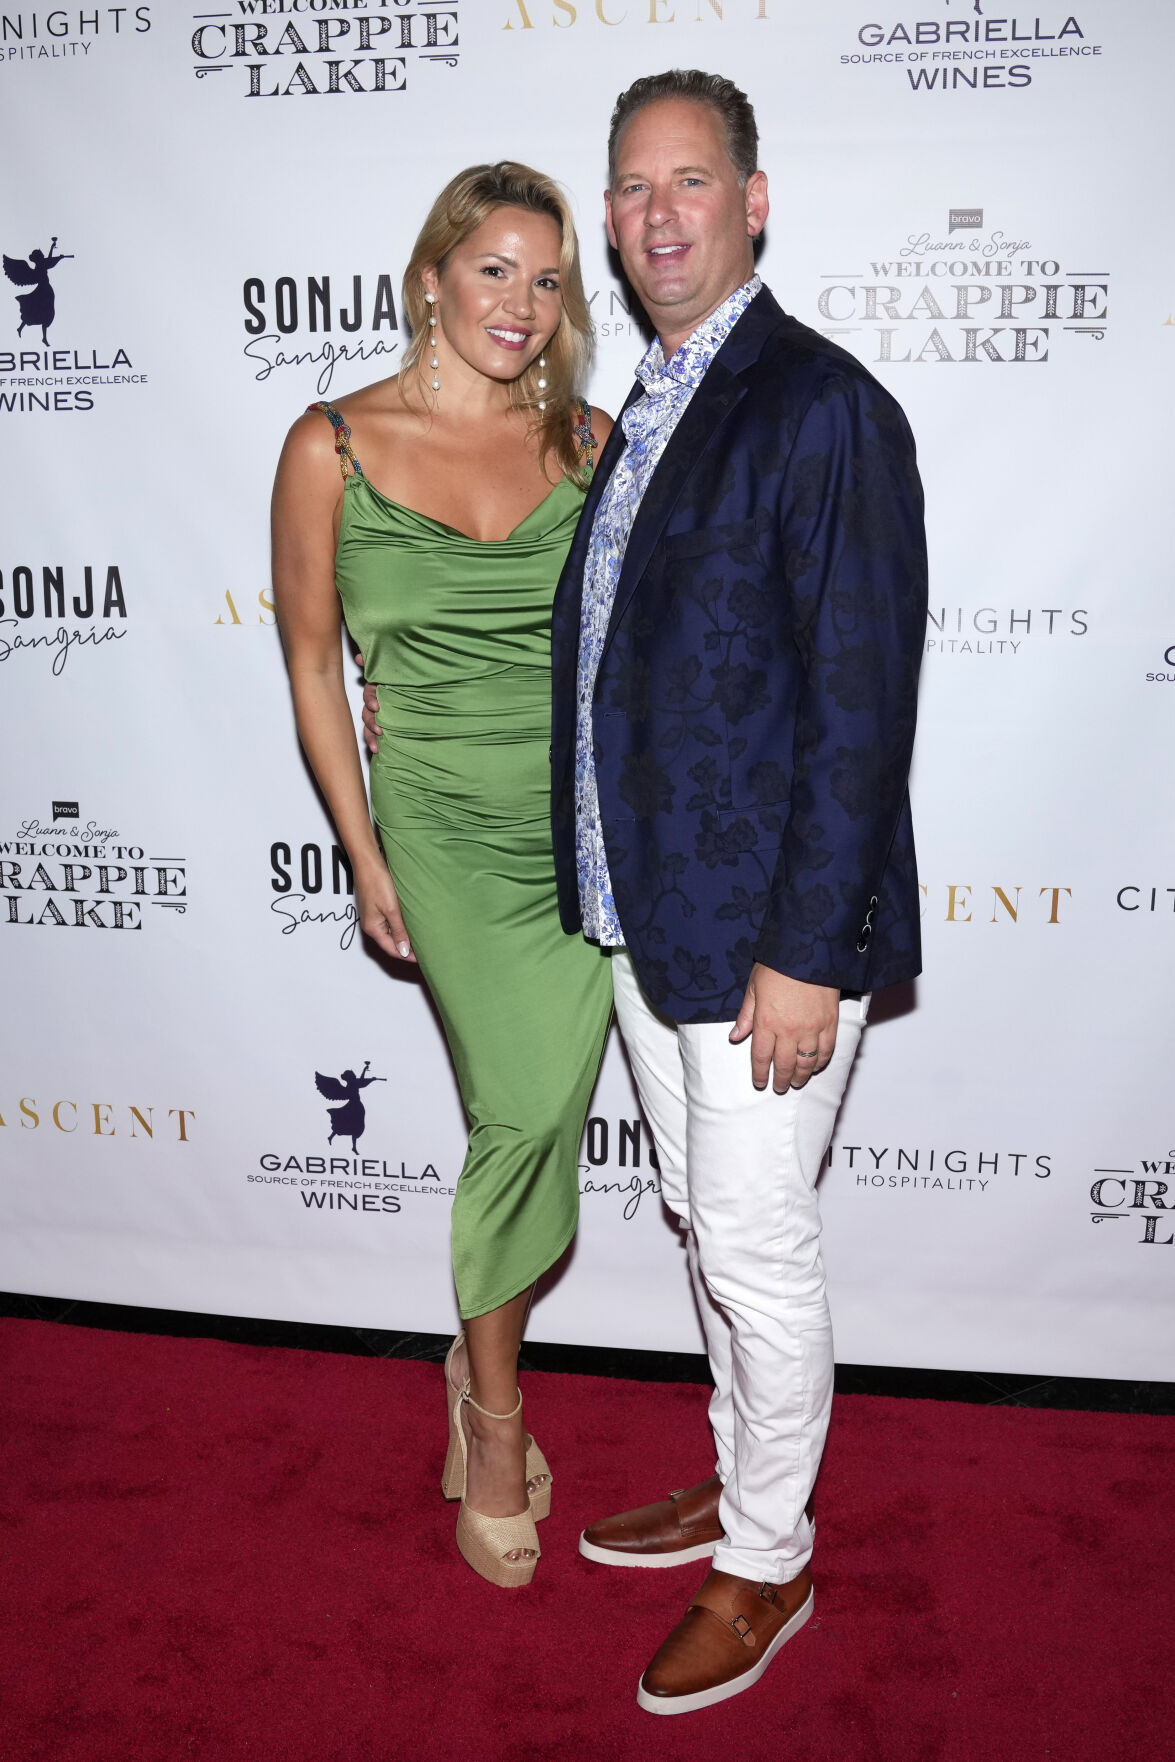 Carrie Packin and Brian Packin at the "Luann and Sonja: Welcome to Crappie Lake" premiere party on July 09, 2023 in New York City.